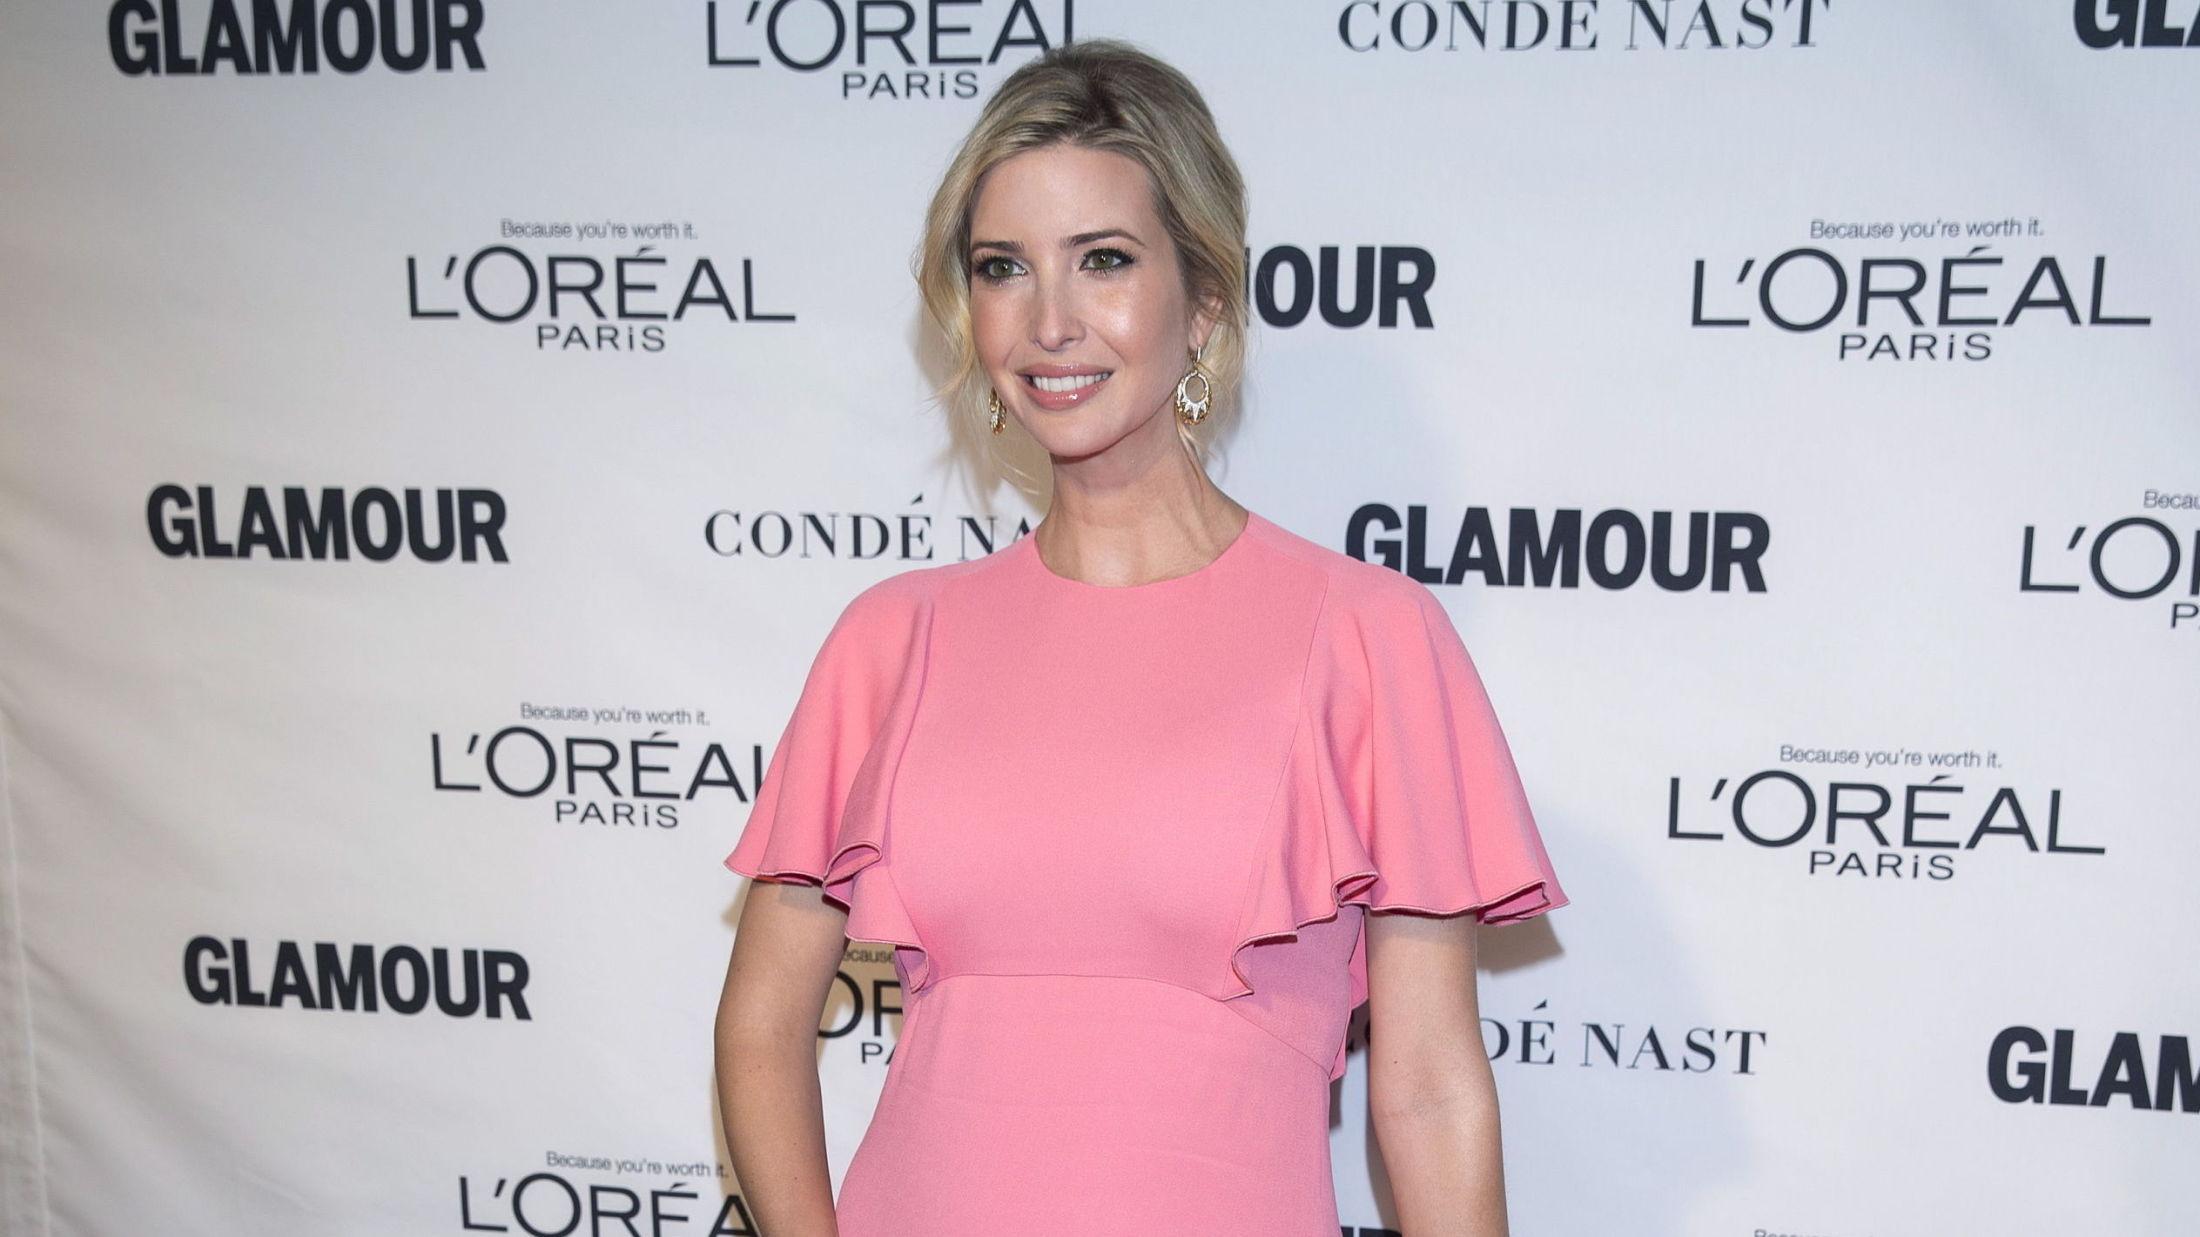 Ivanka Trump arrives for the "Glamour Women of the Year Awards" in the Manhattan borough of New York, November 9, 2015. REUTERS/Carlo Allegri